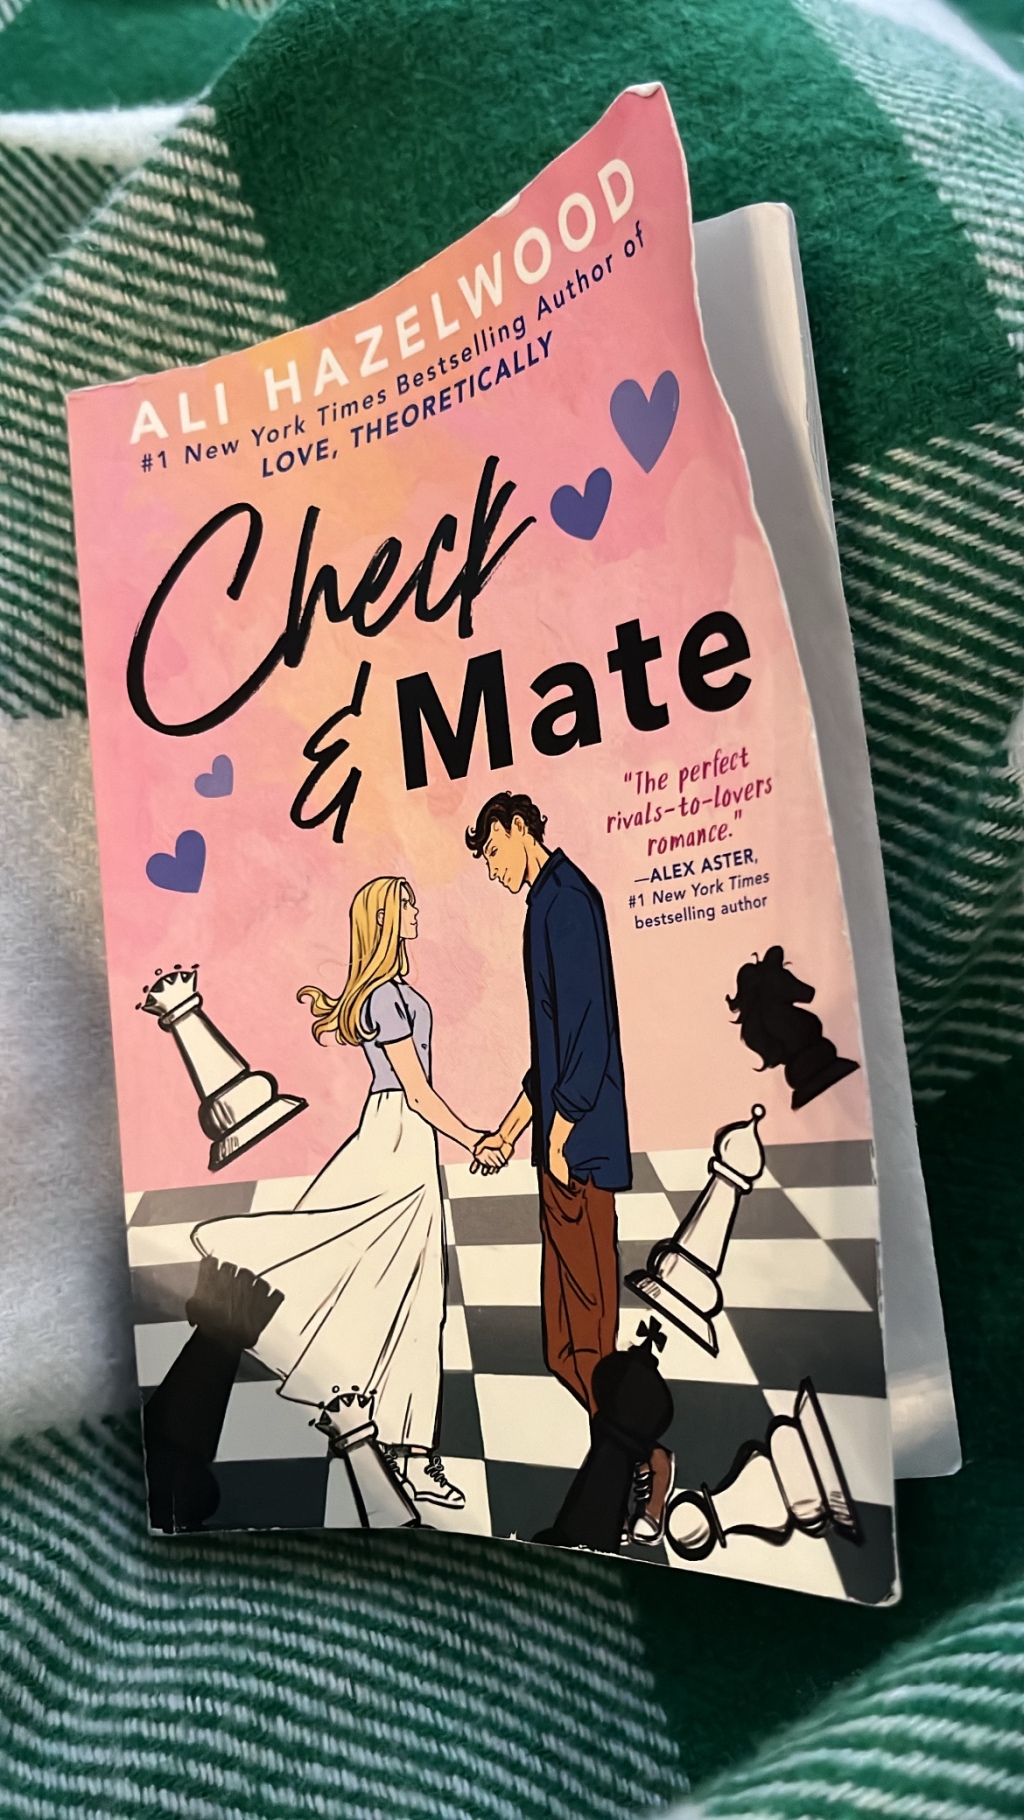 Book Review: Check & Mate by Ali Hazelwood